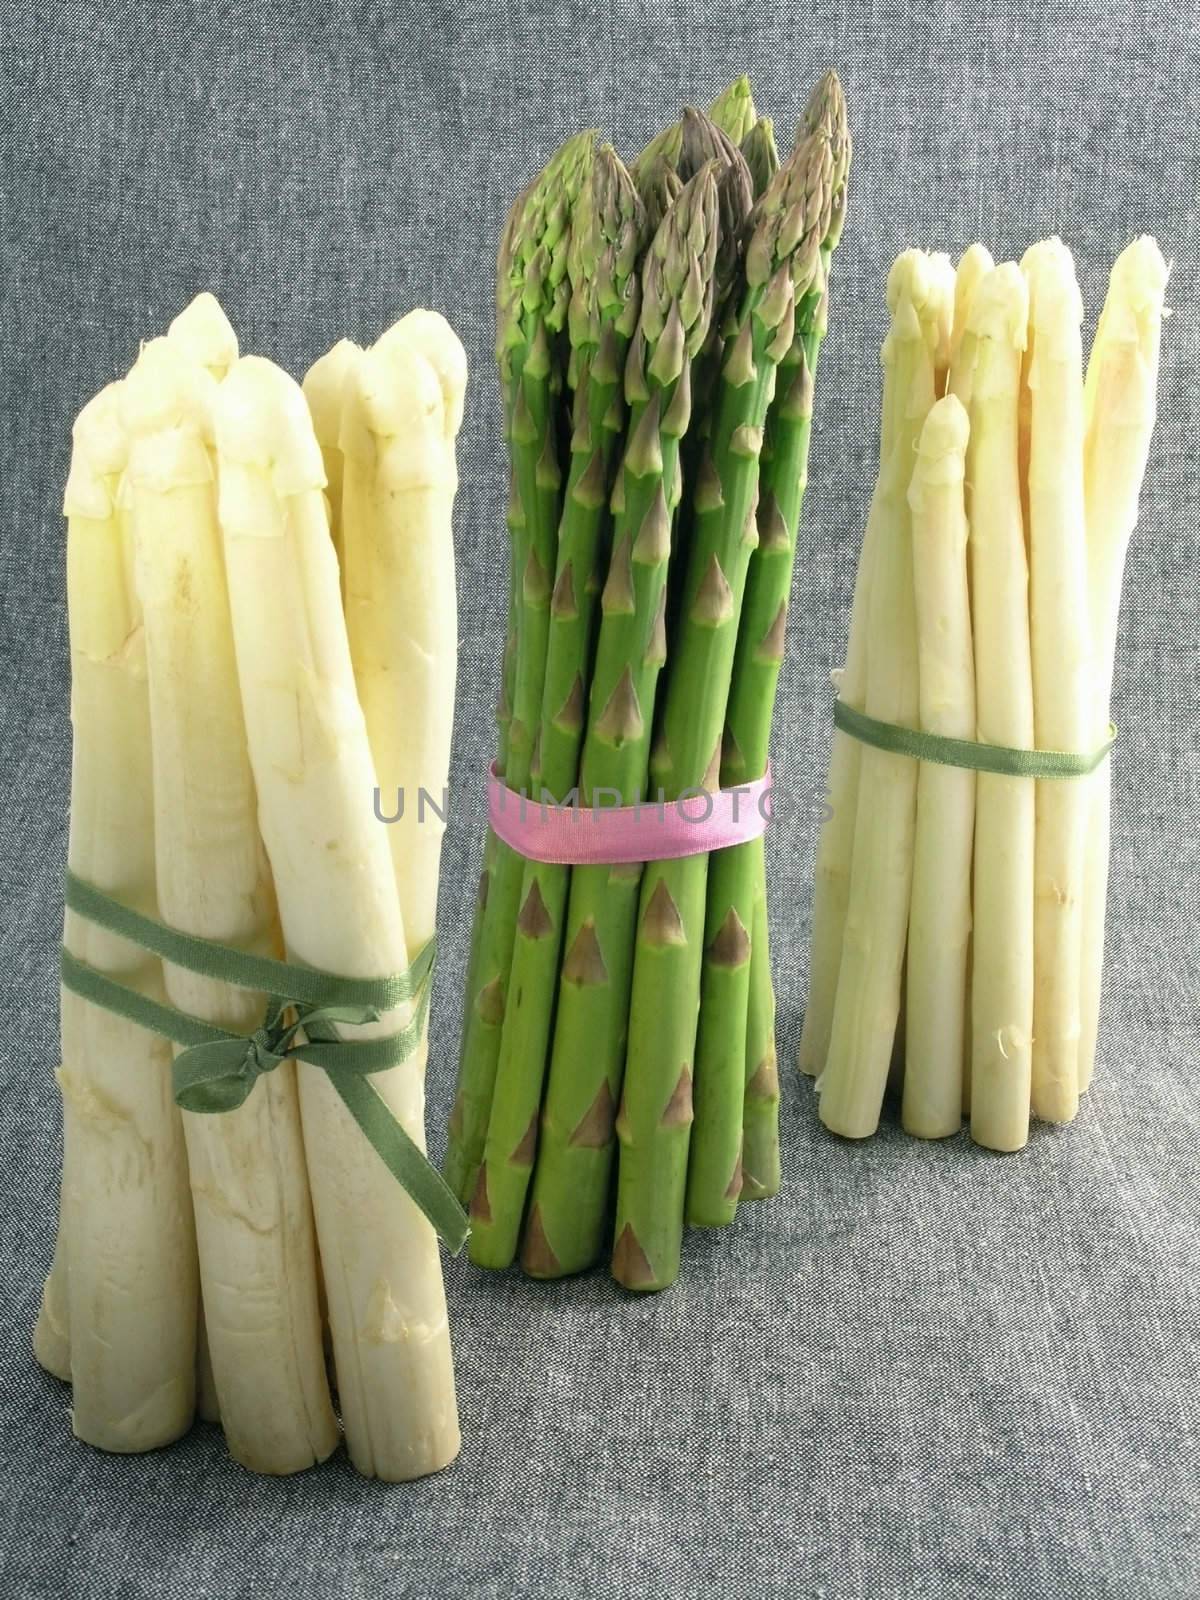  bunch of asparagus isolated on dark background